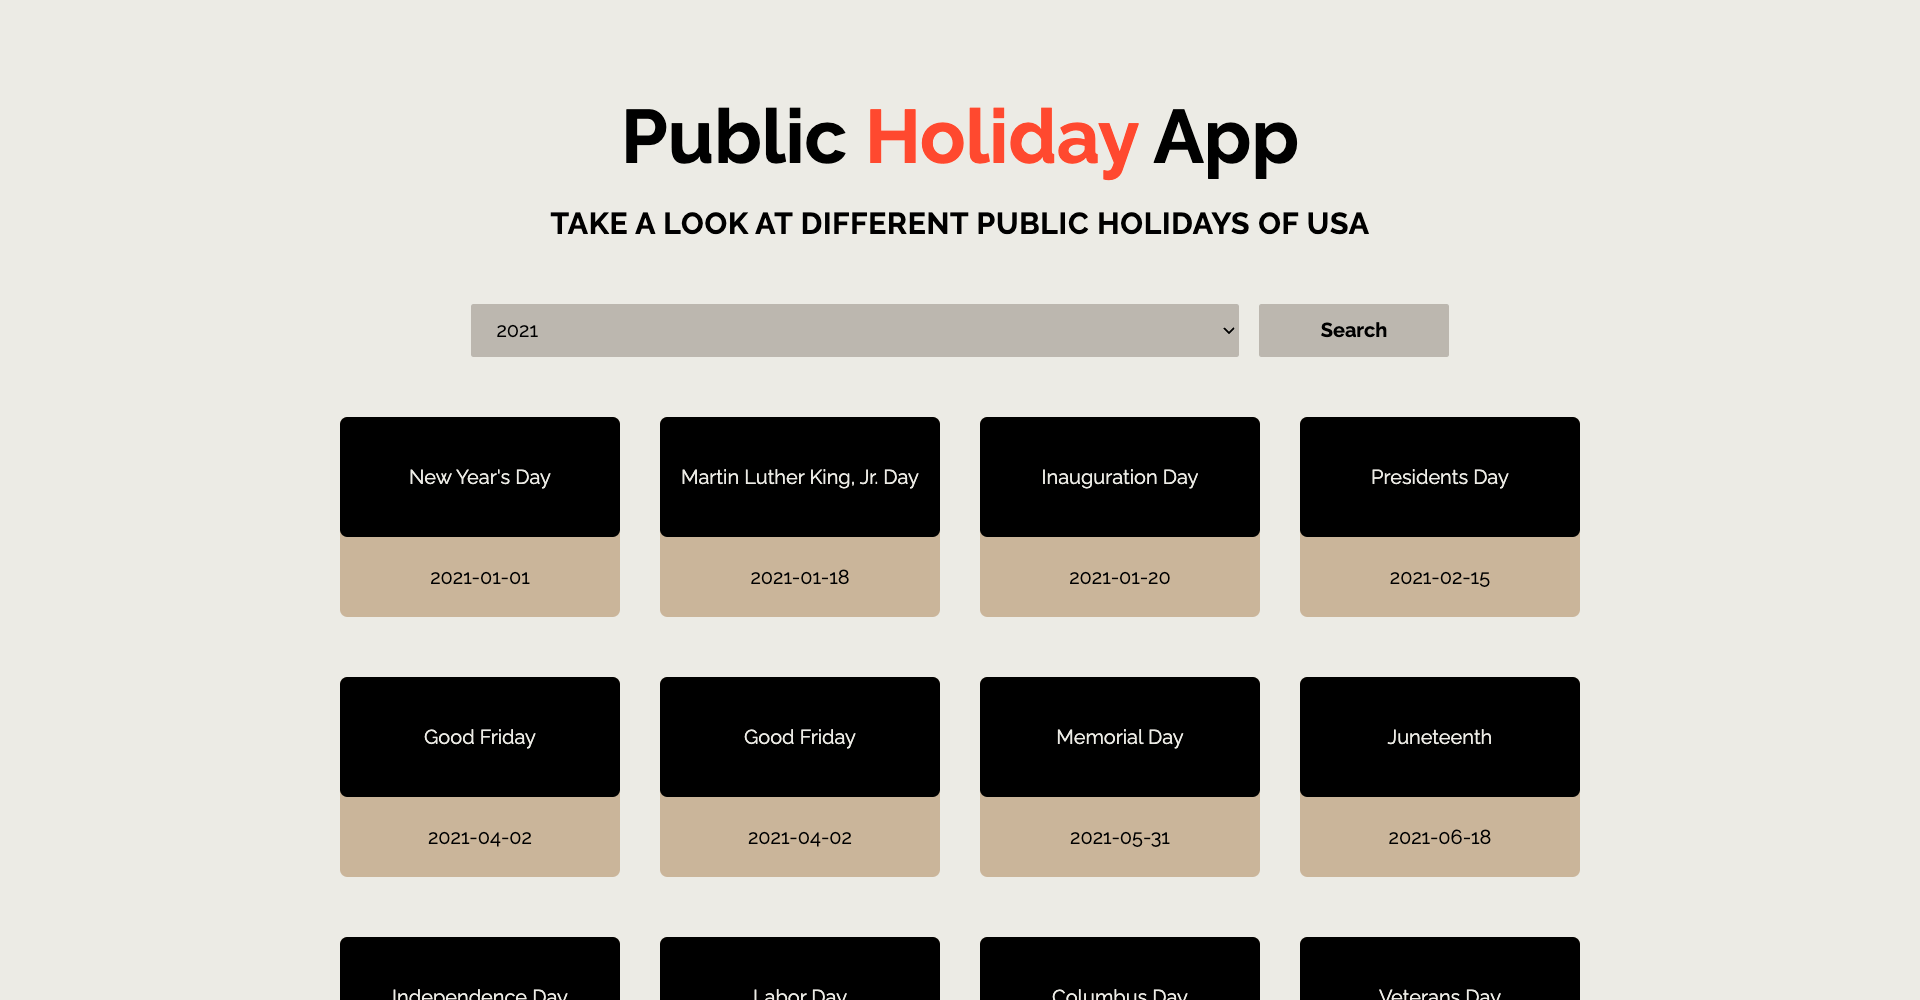 Public Holiday Application built with Next.js and Public Holiday API